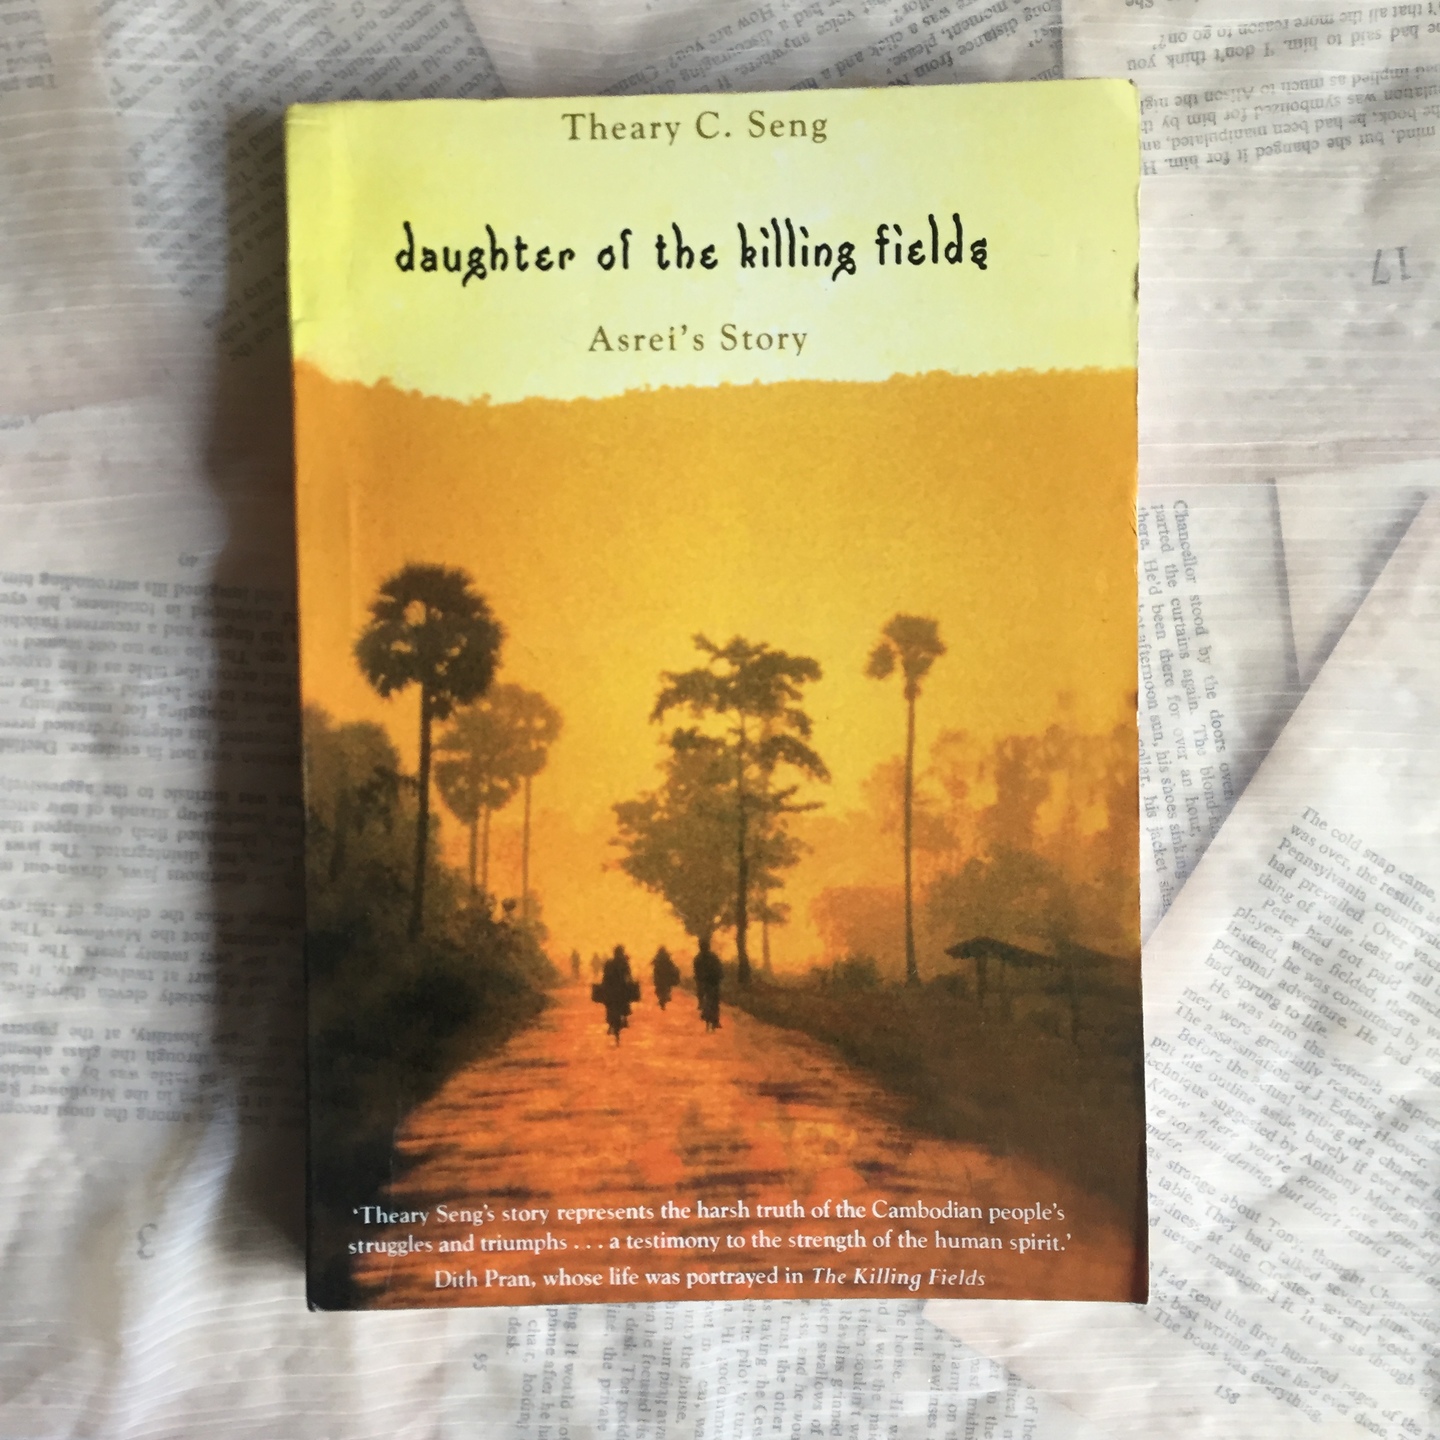 Daughter of the Killing Fields by Theary C. Seng [Paperback]